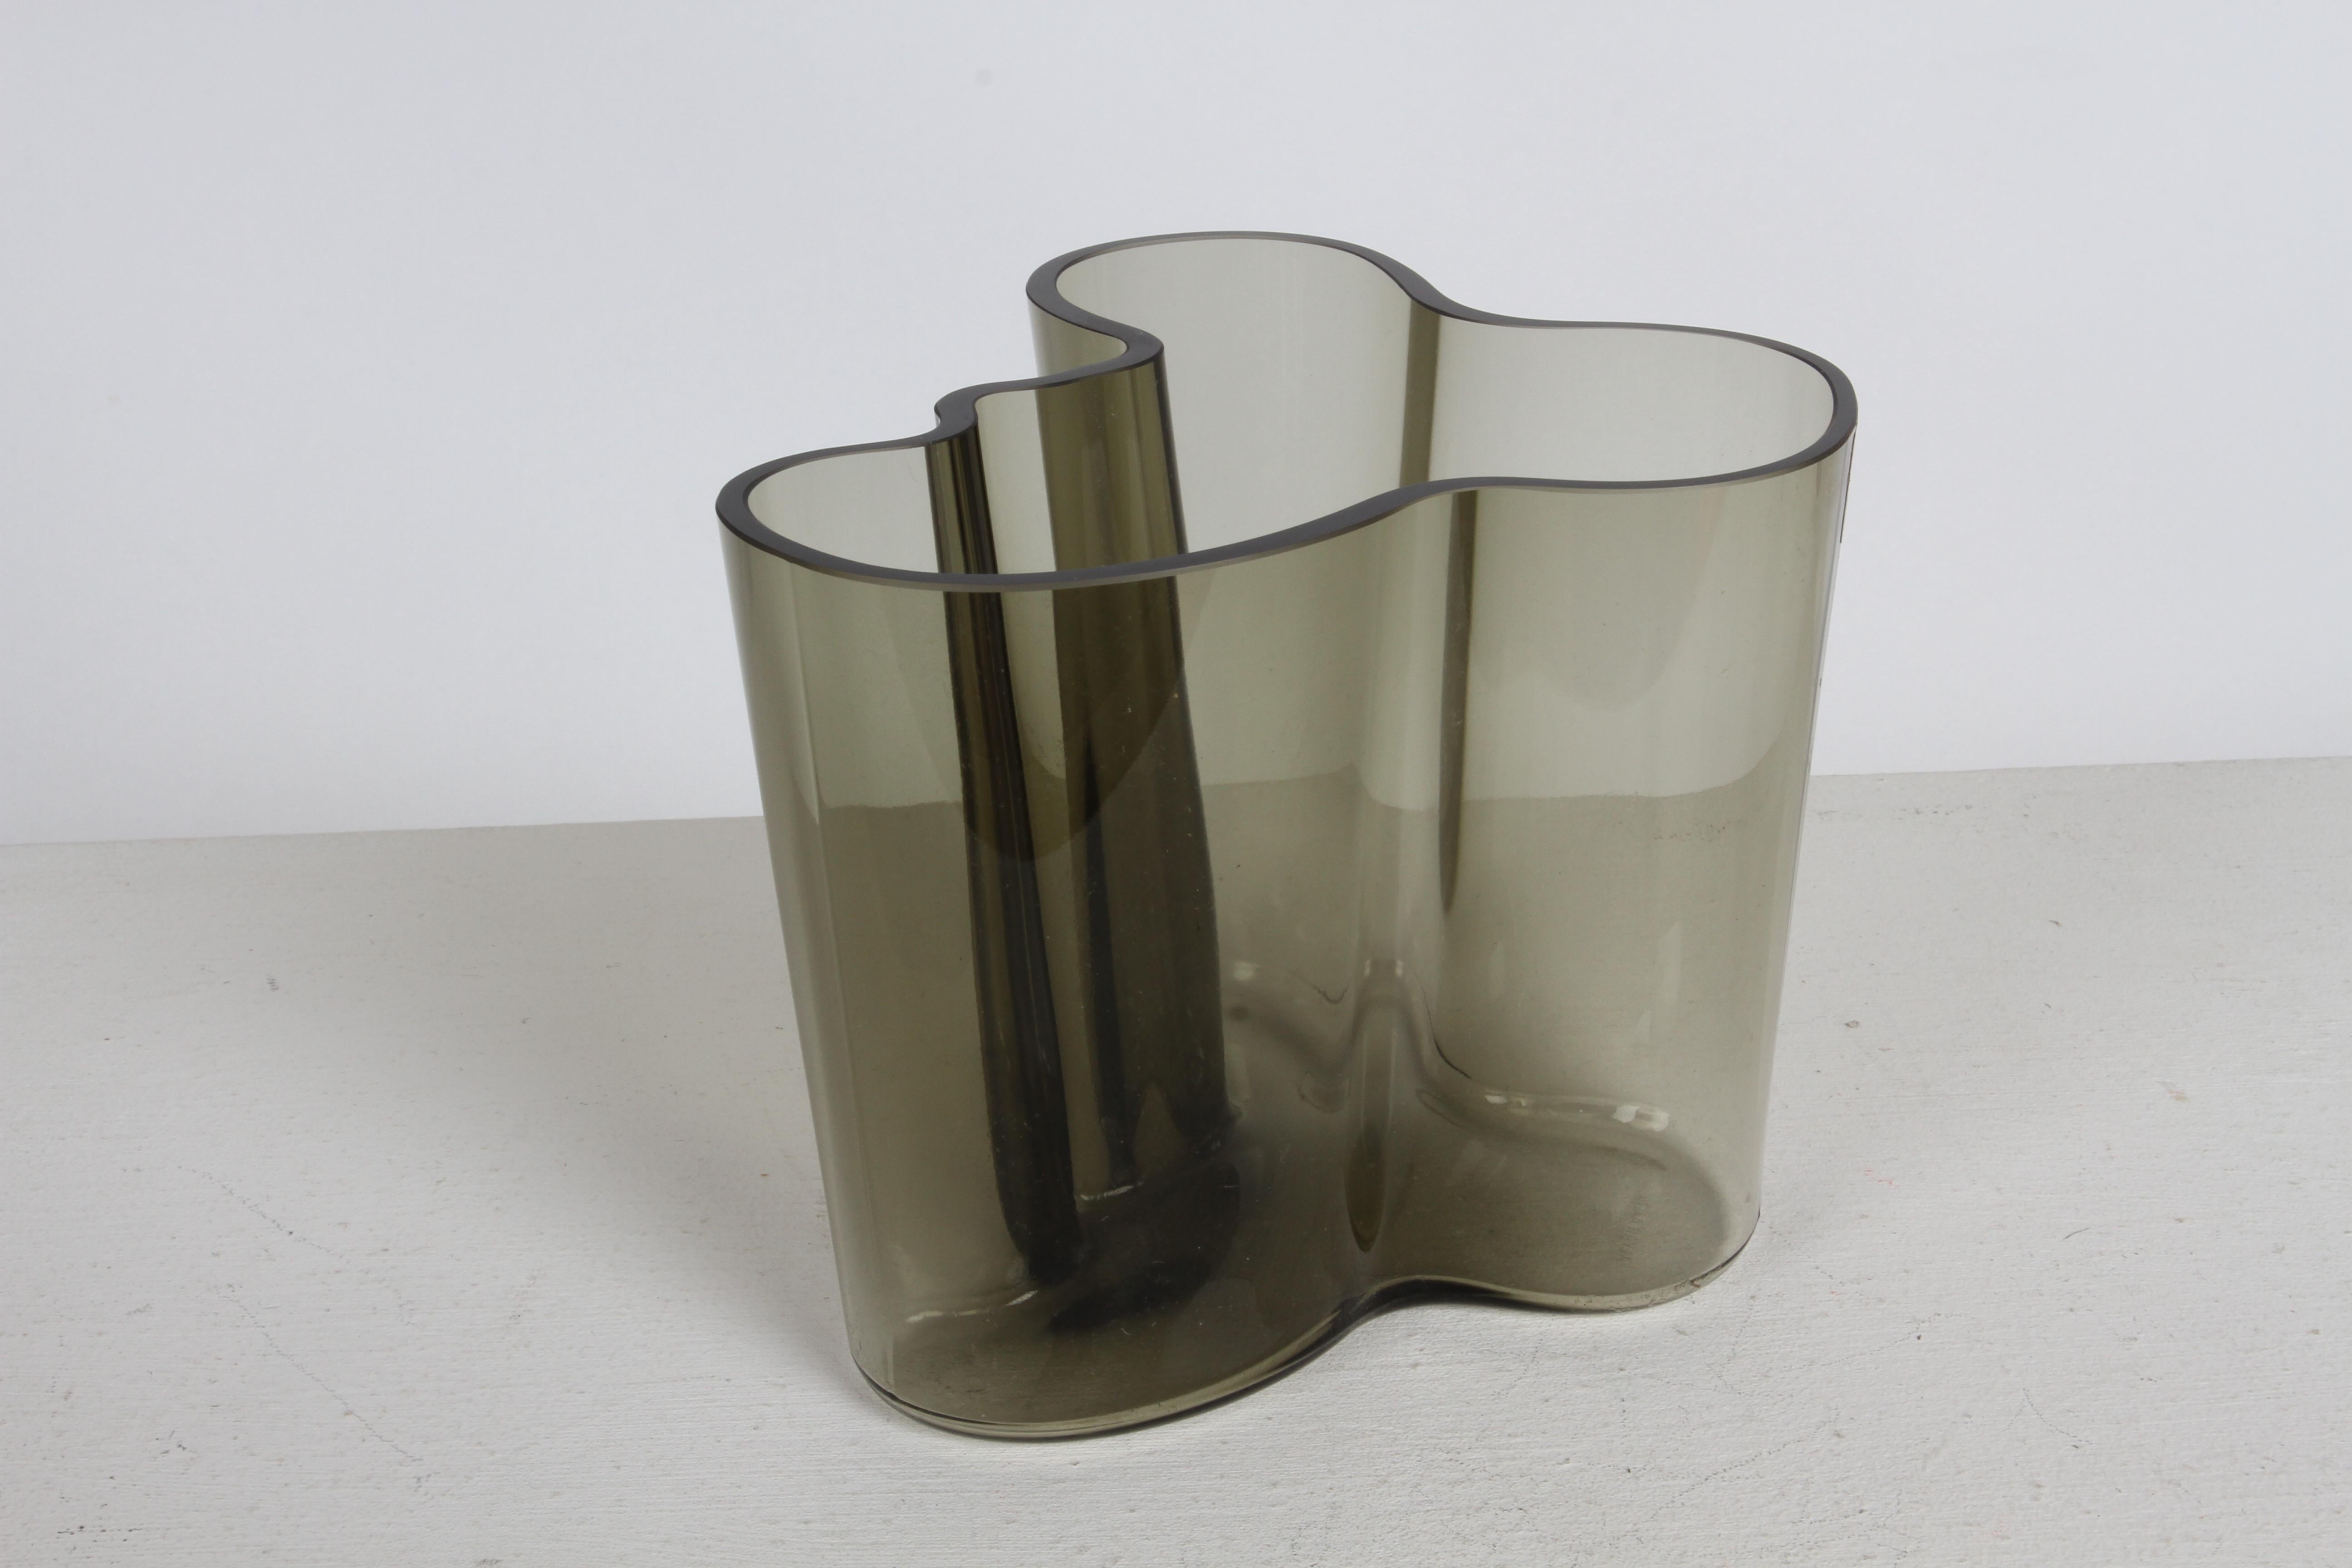 1970s MCM Alvar Aalto Savoy Vase 3030 in Smoke Gray Glass by Iittala Finland For Sale 3